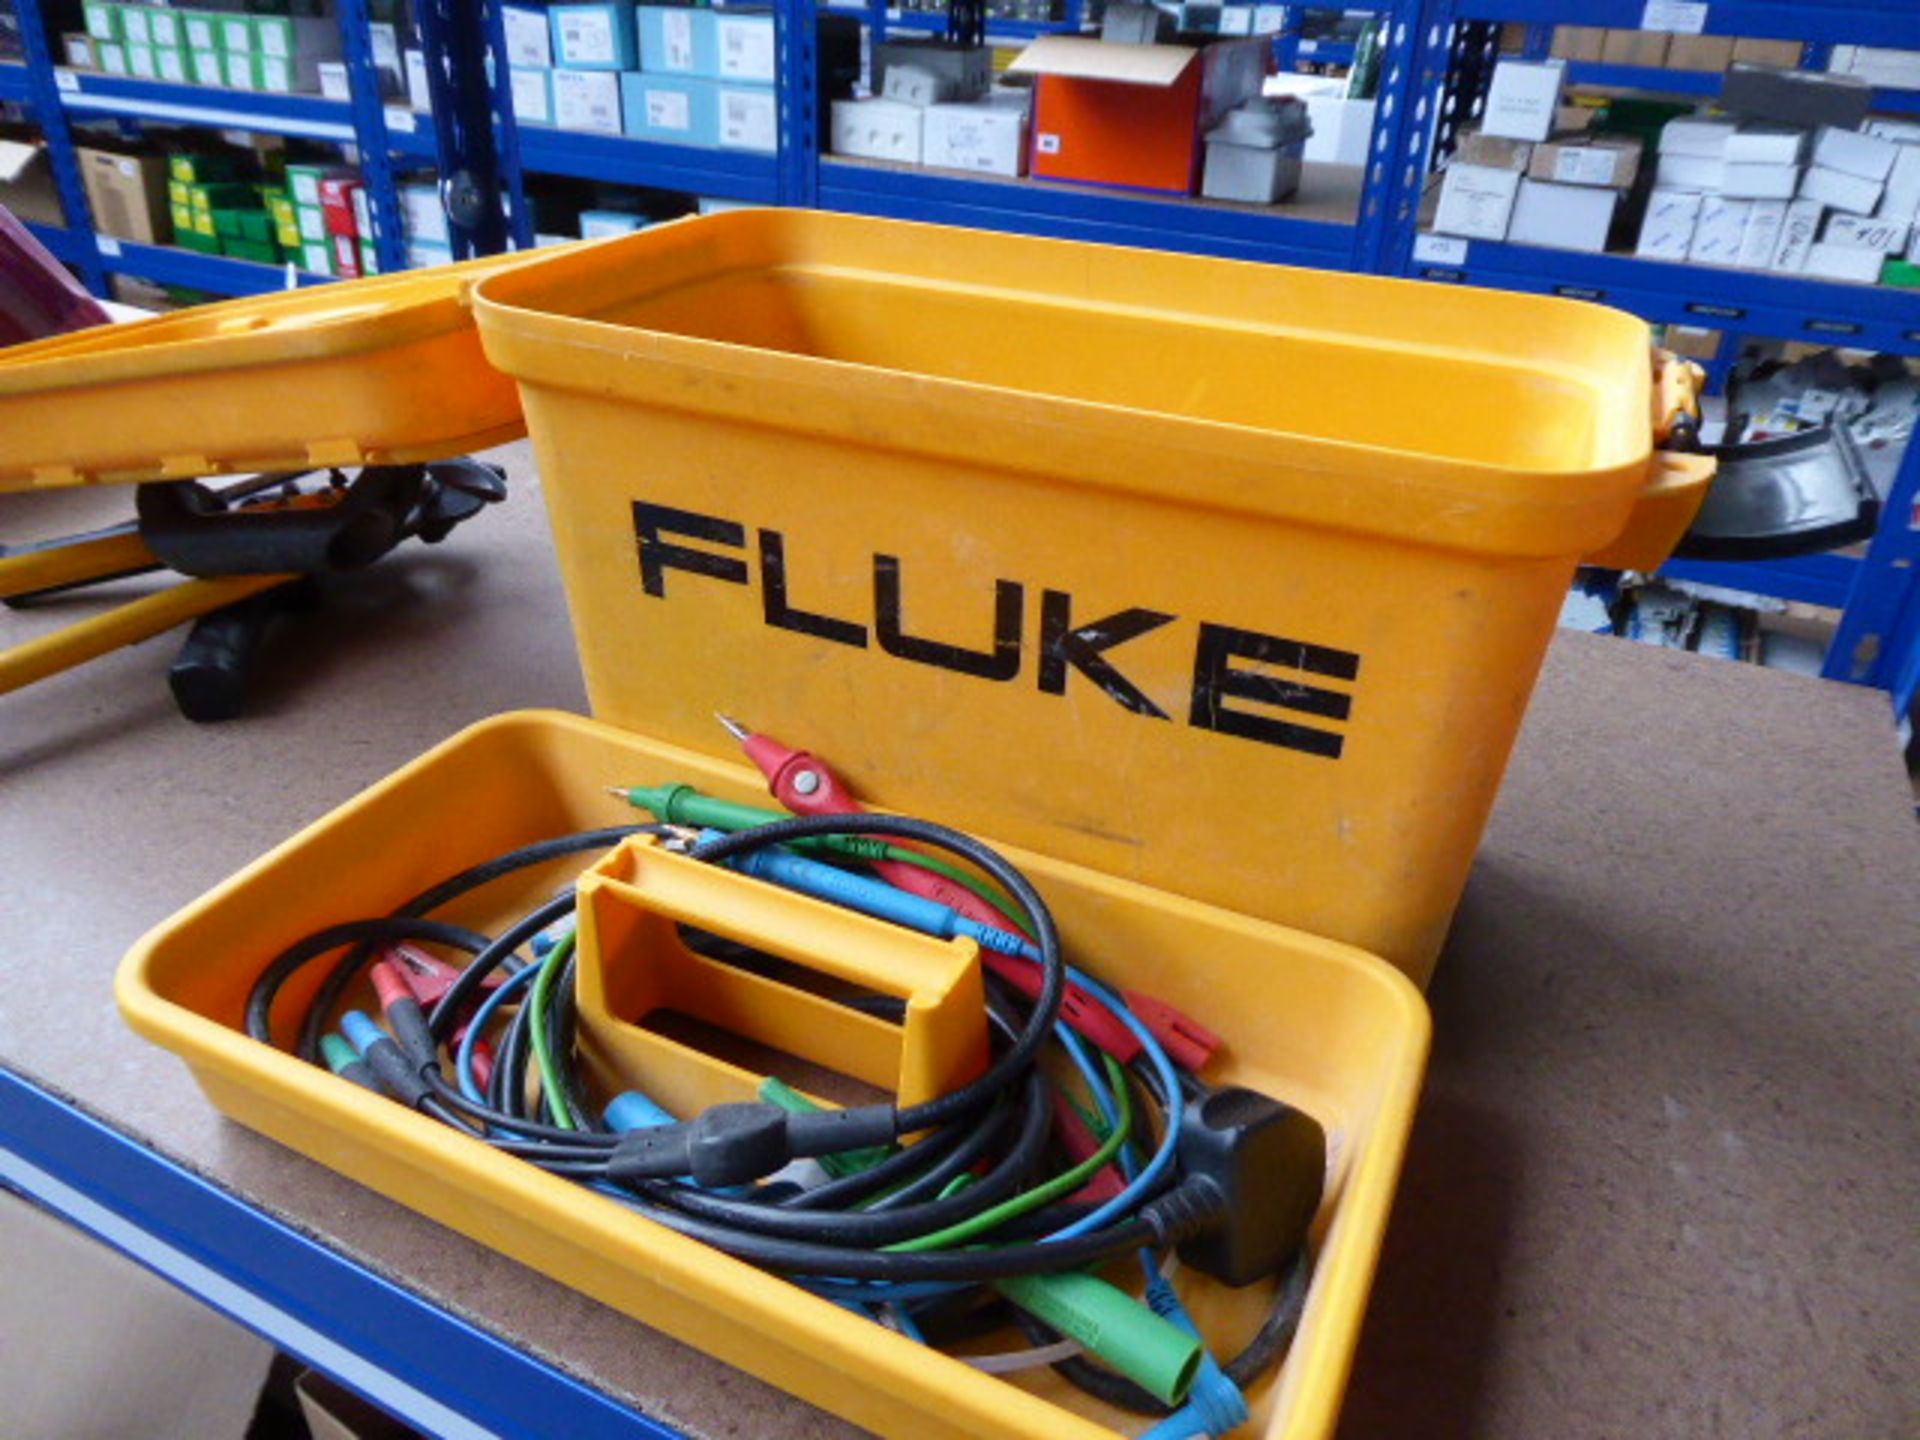 A Fluke model 1652B multifuction tester with associated cabling in carrying case - Image 2 of 3